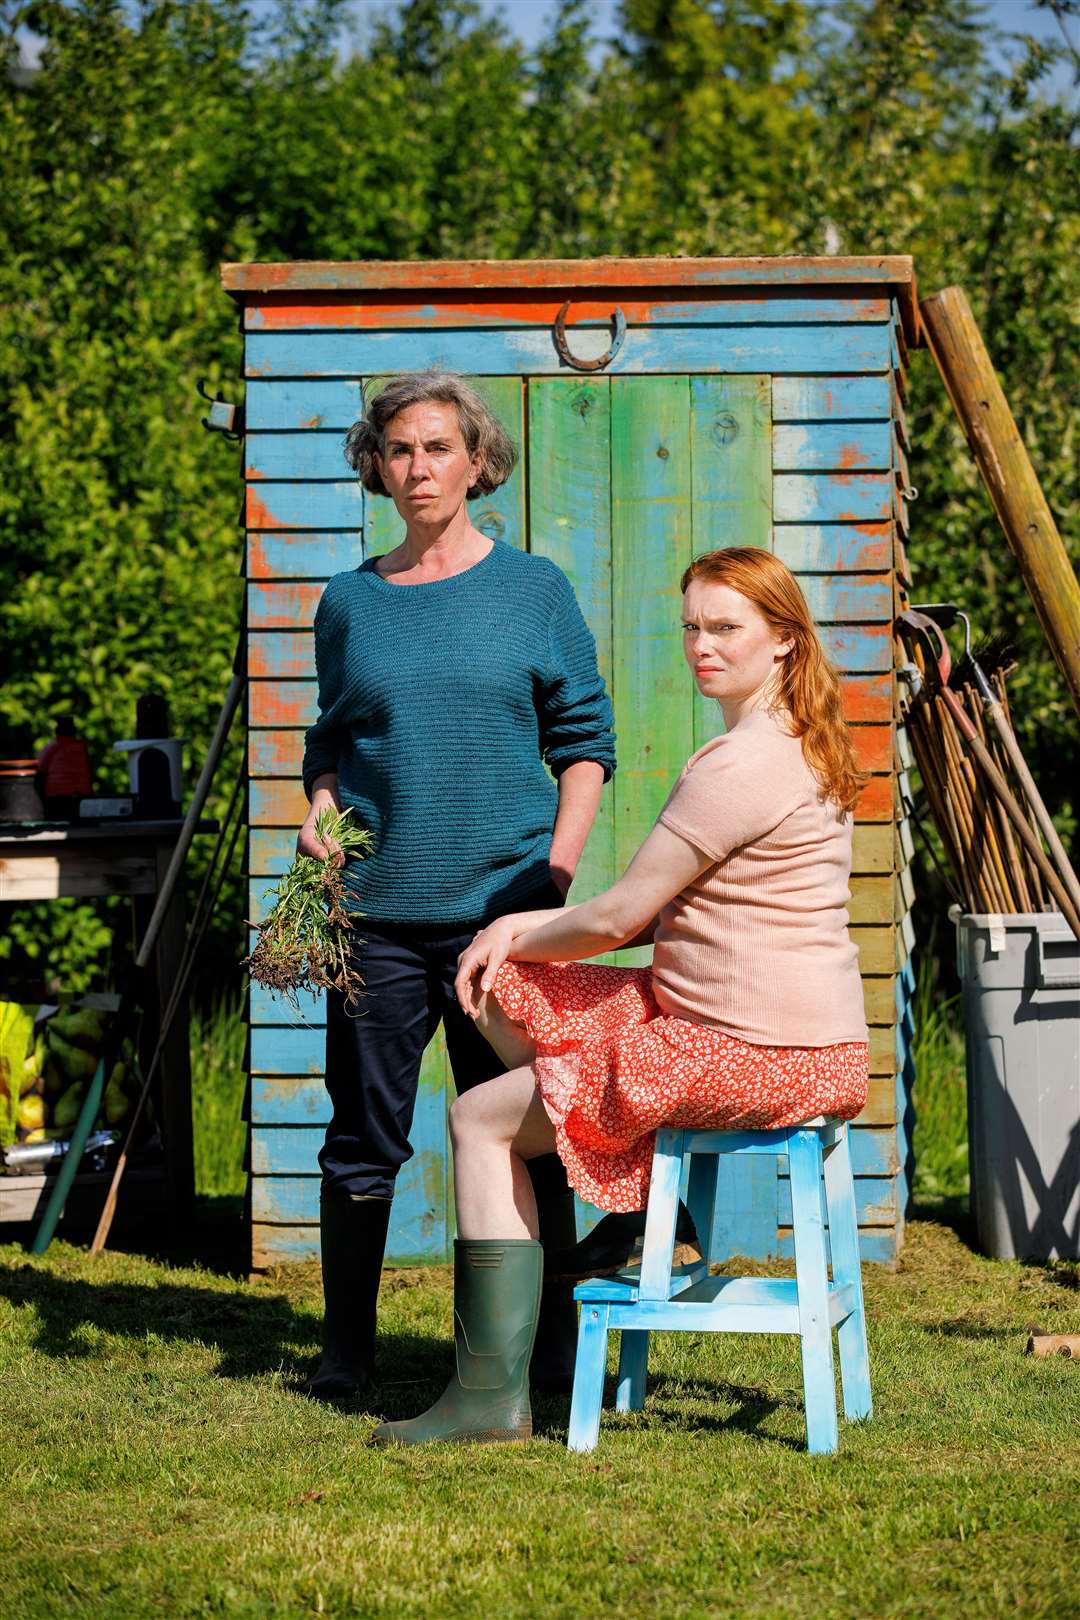 Publicity still for Allotment. Picture: Robert Ormerod